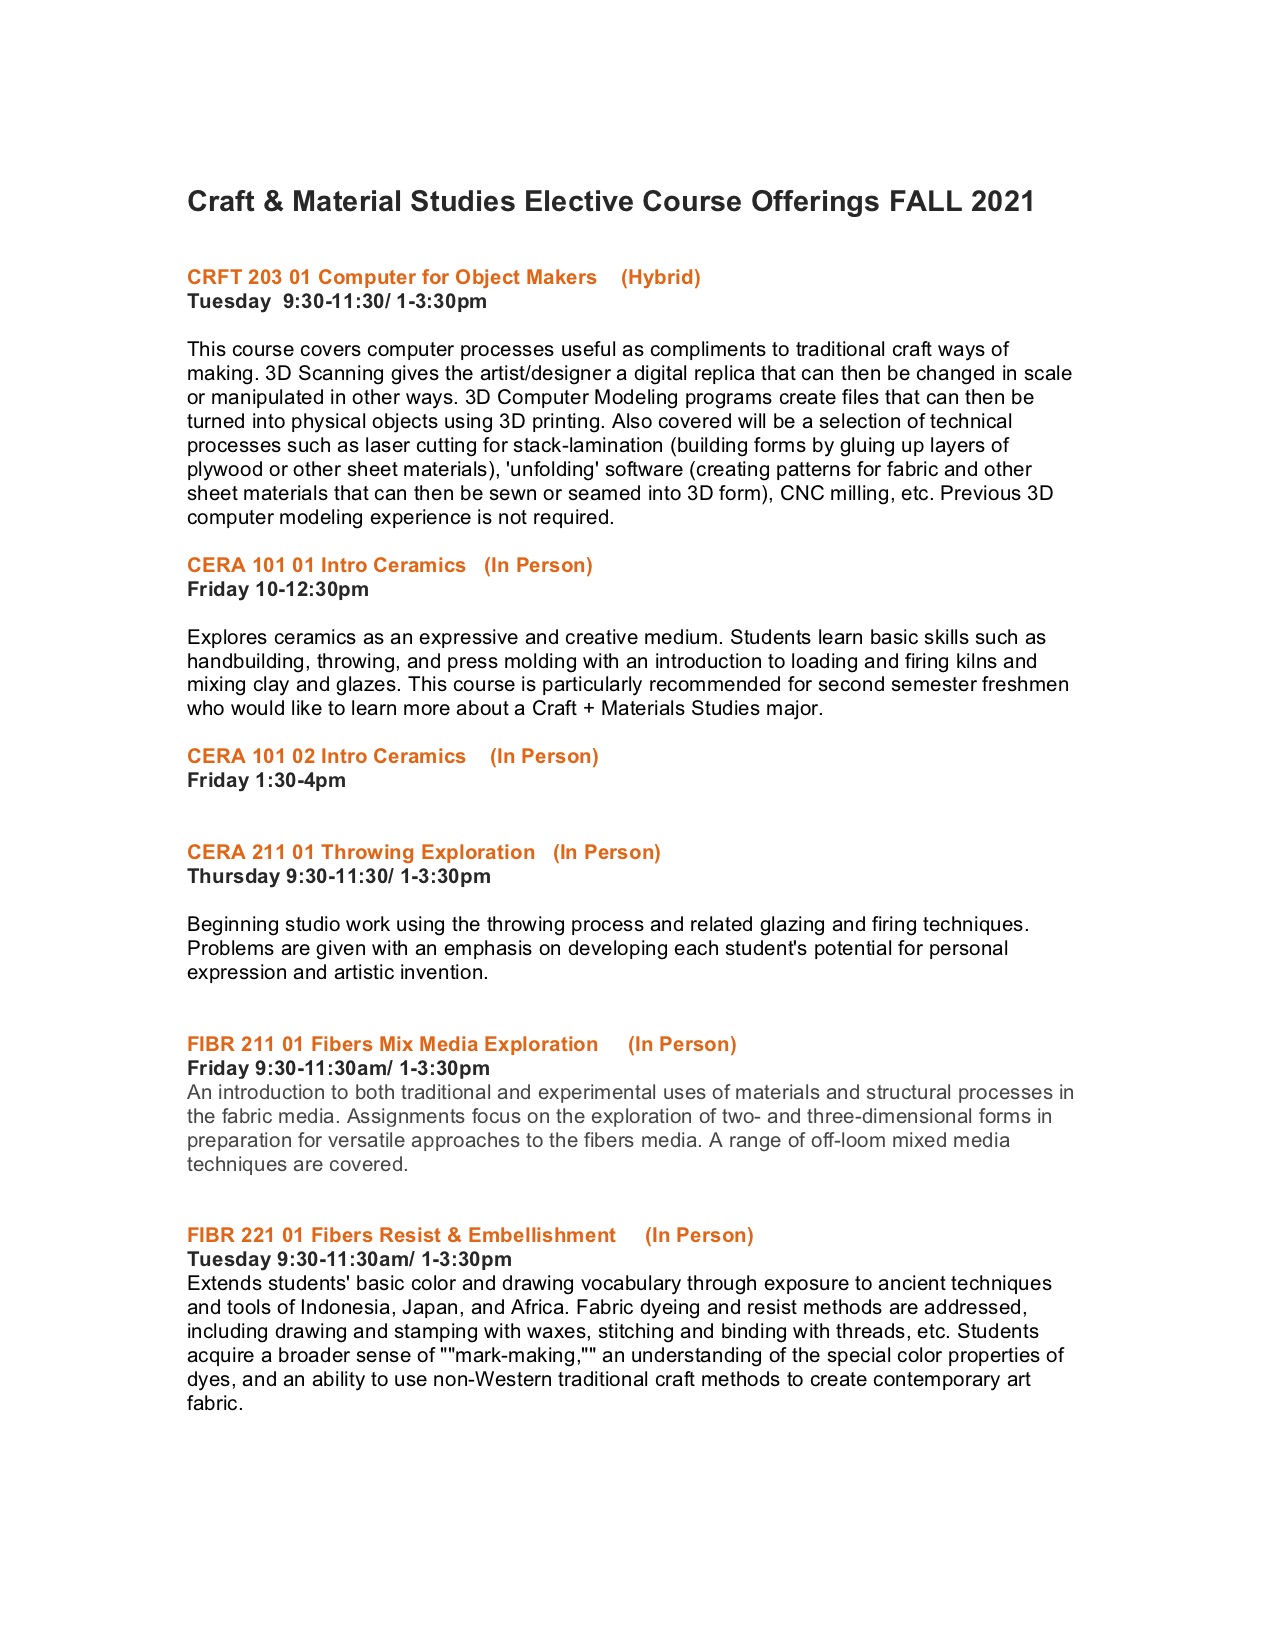 C&MS Fall 2021 Elective Courses